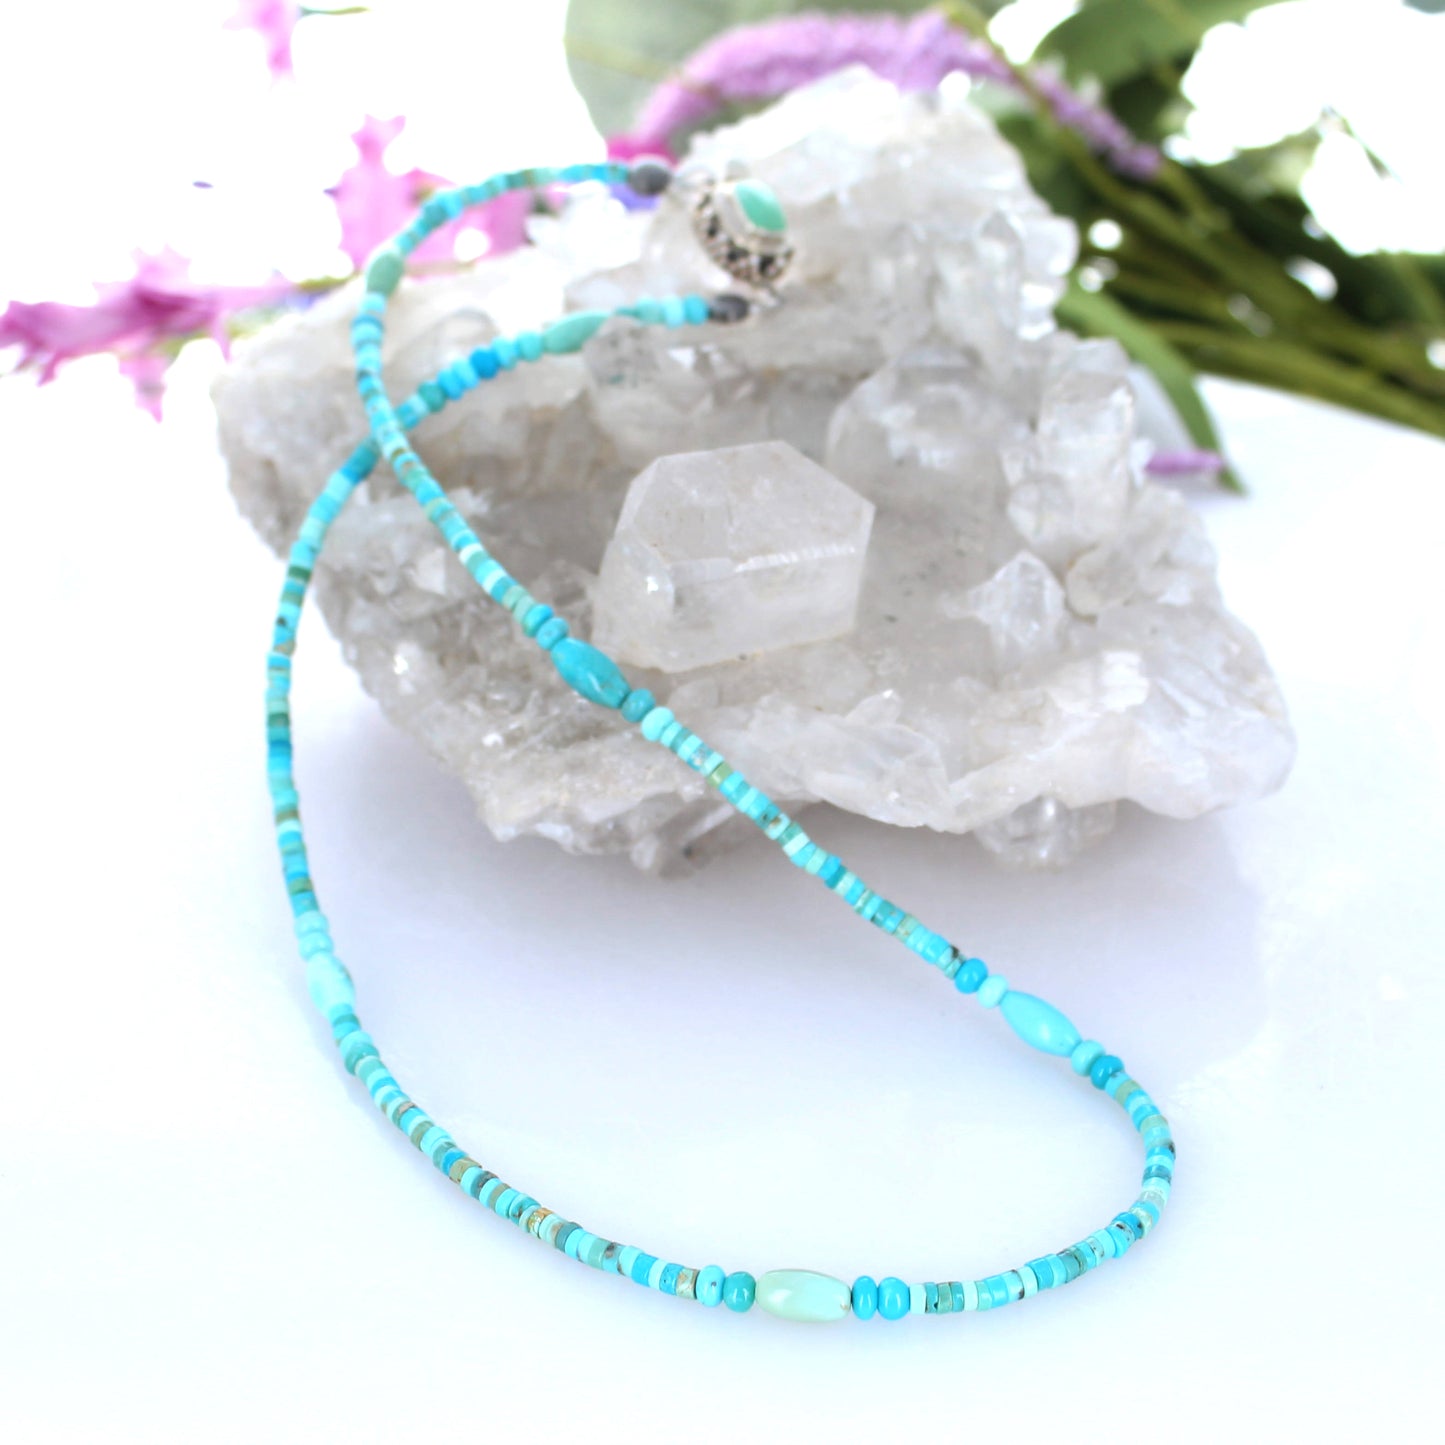 100% Natural Sleeping Beauty Turquoise Necklace Multi Color Sterling